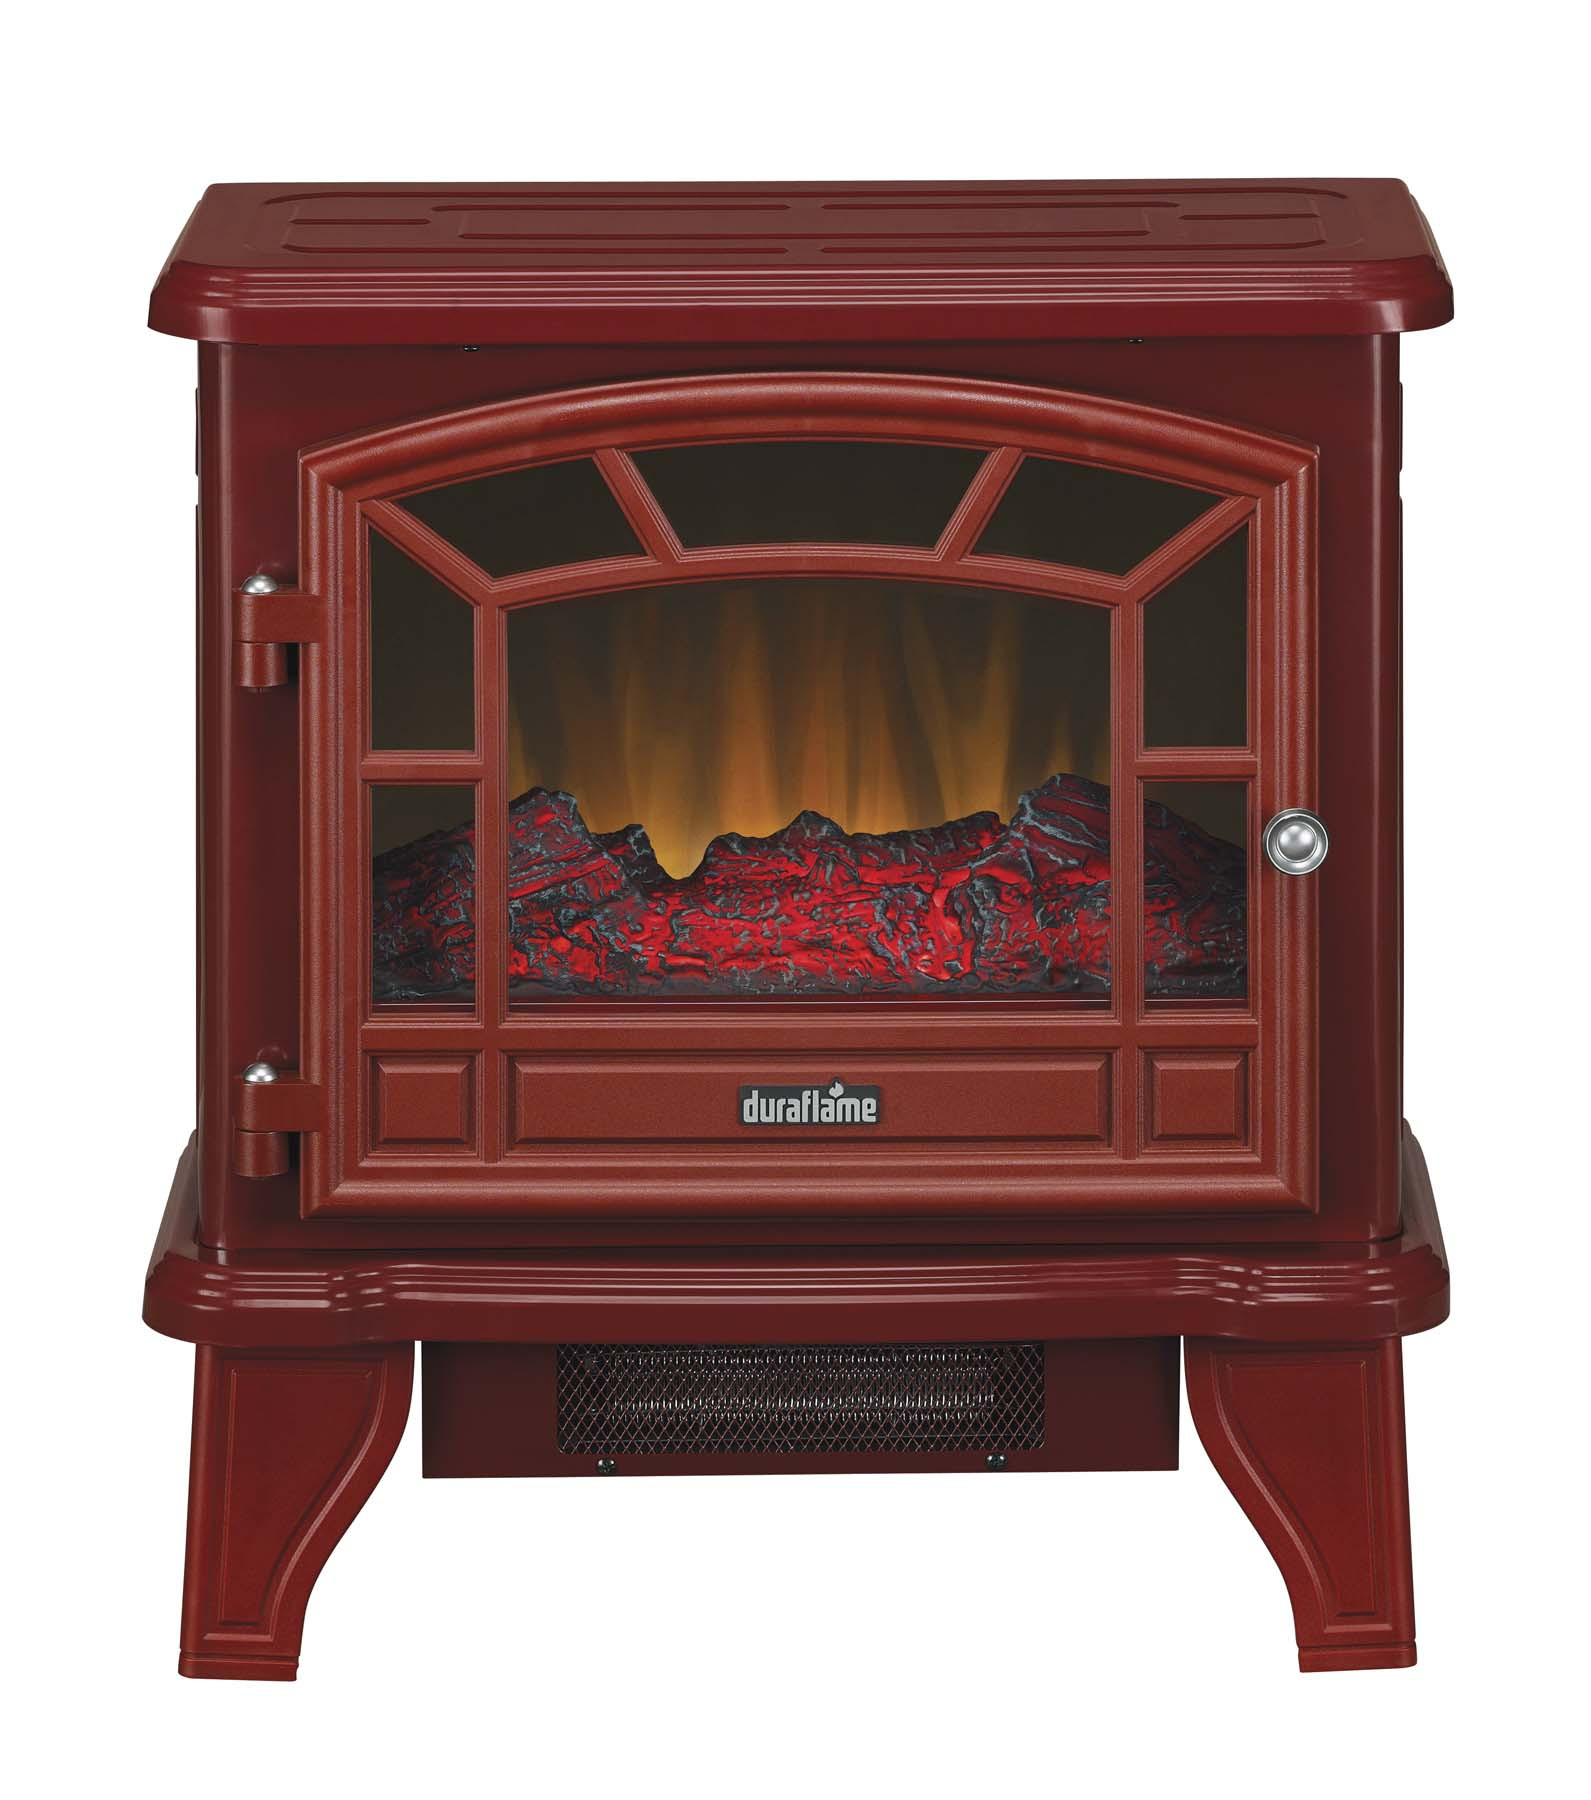 Duraflame Electric Fireplace Tv Stand
 20 Duraflame Red Stove Electric Fireplace